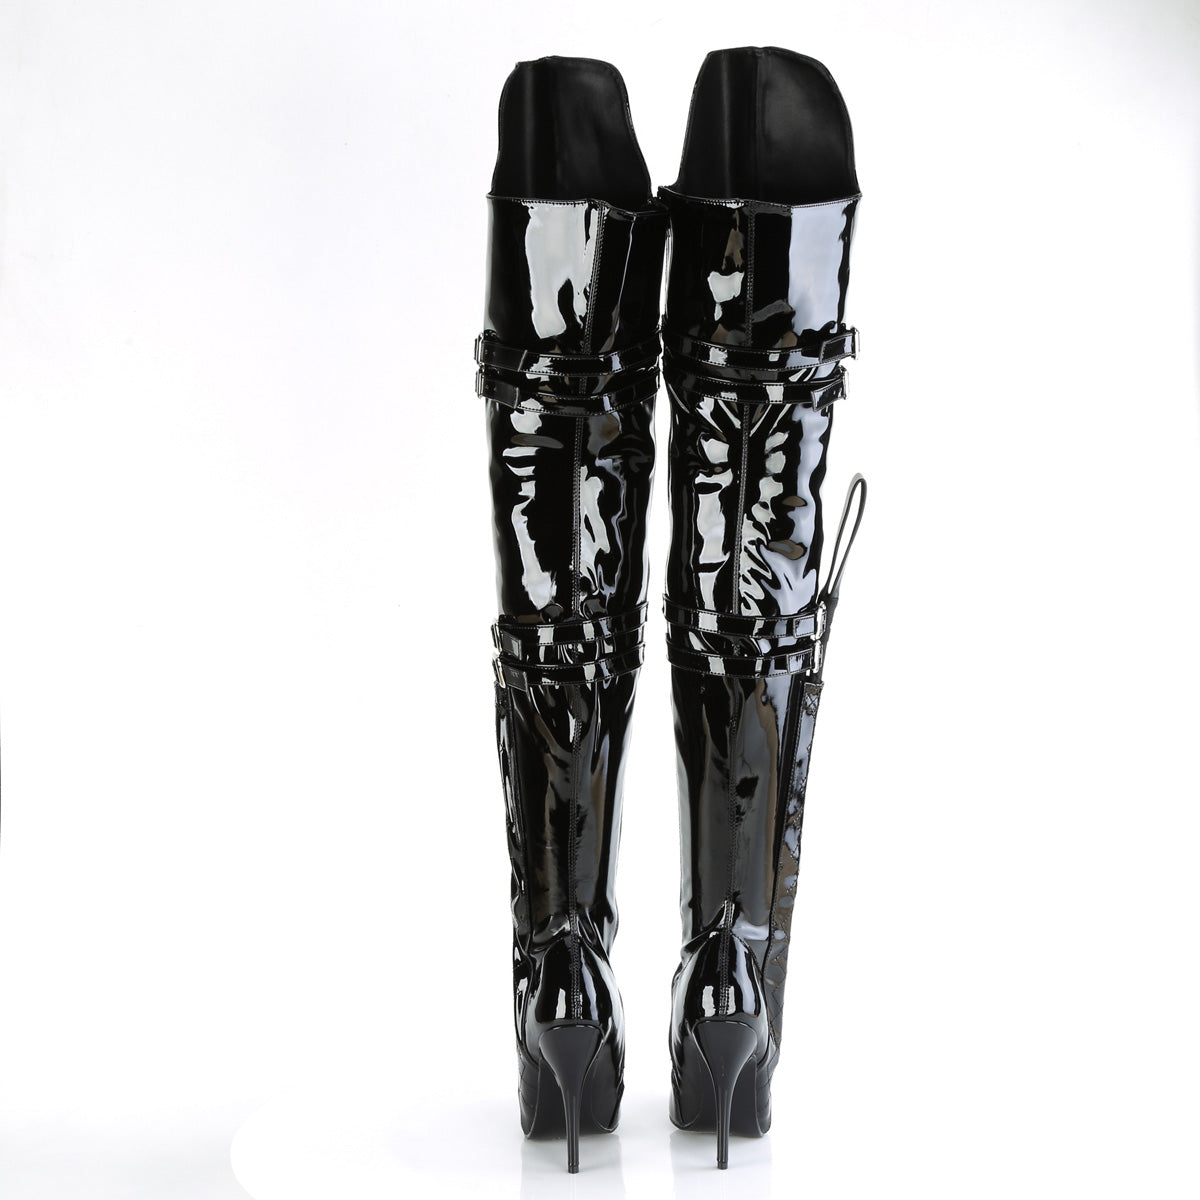 Large size Thigh High Boots - Pleaser Seduce-3080